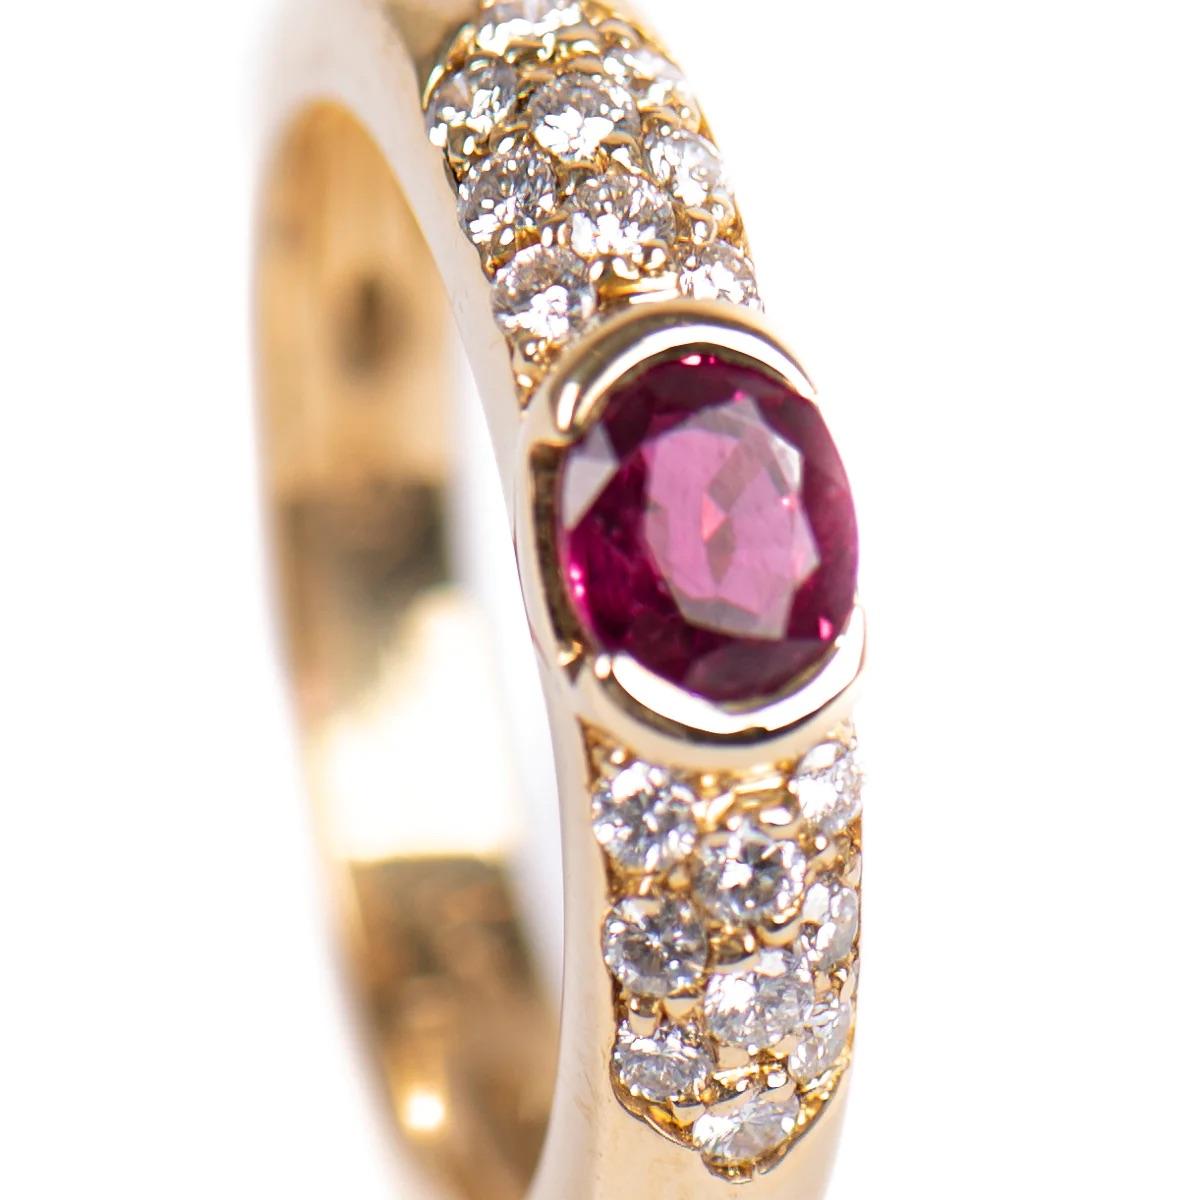 Exquisite Vintage 18K Yellow Gold Piaget Diamond & Ruby Ring

Description:
Discover timeless sophistication with this enchanting vintage diamond and ruby ring from the renowned house of Piaget. A symbol of elegance and luxury, this exquisite piece